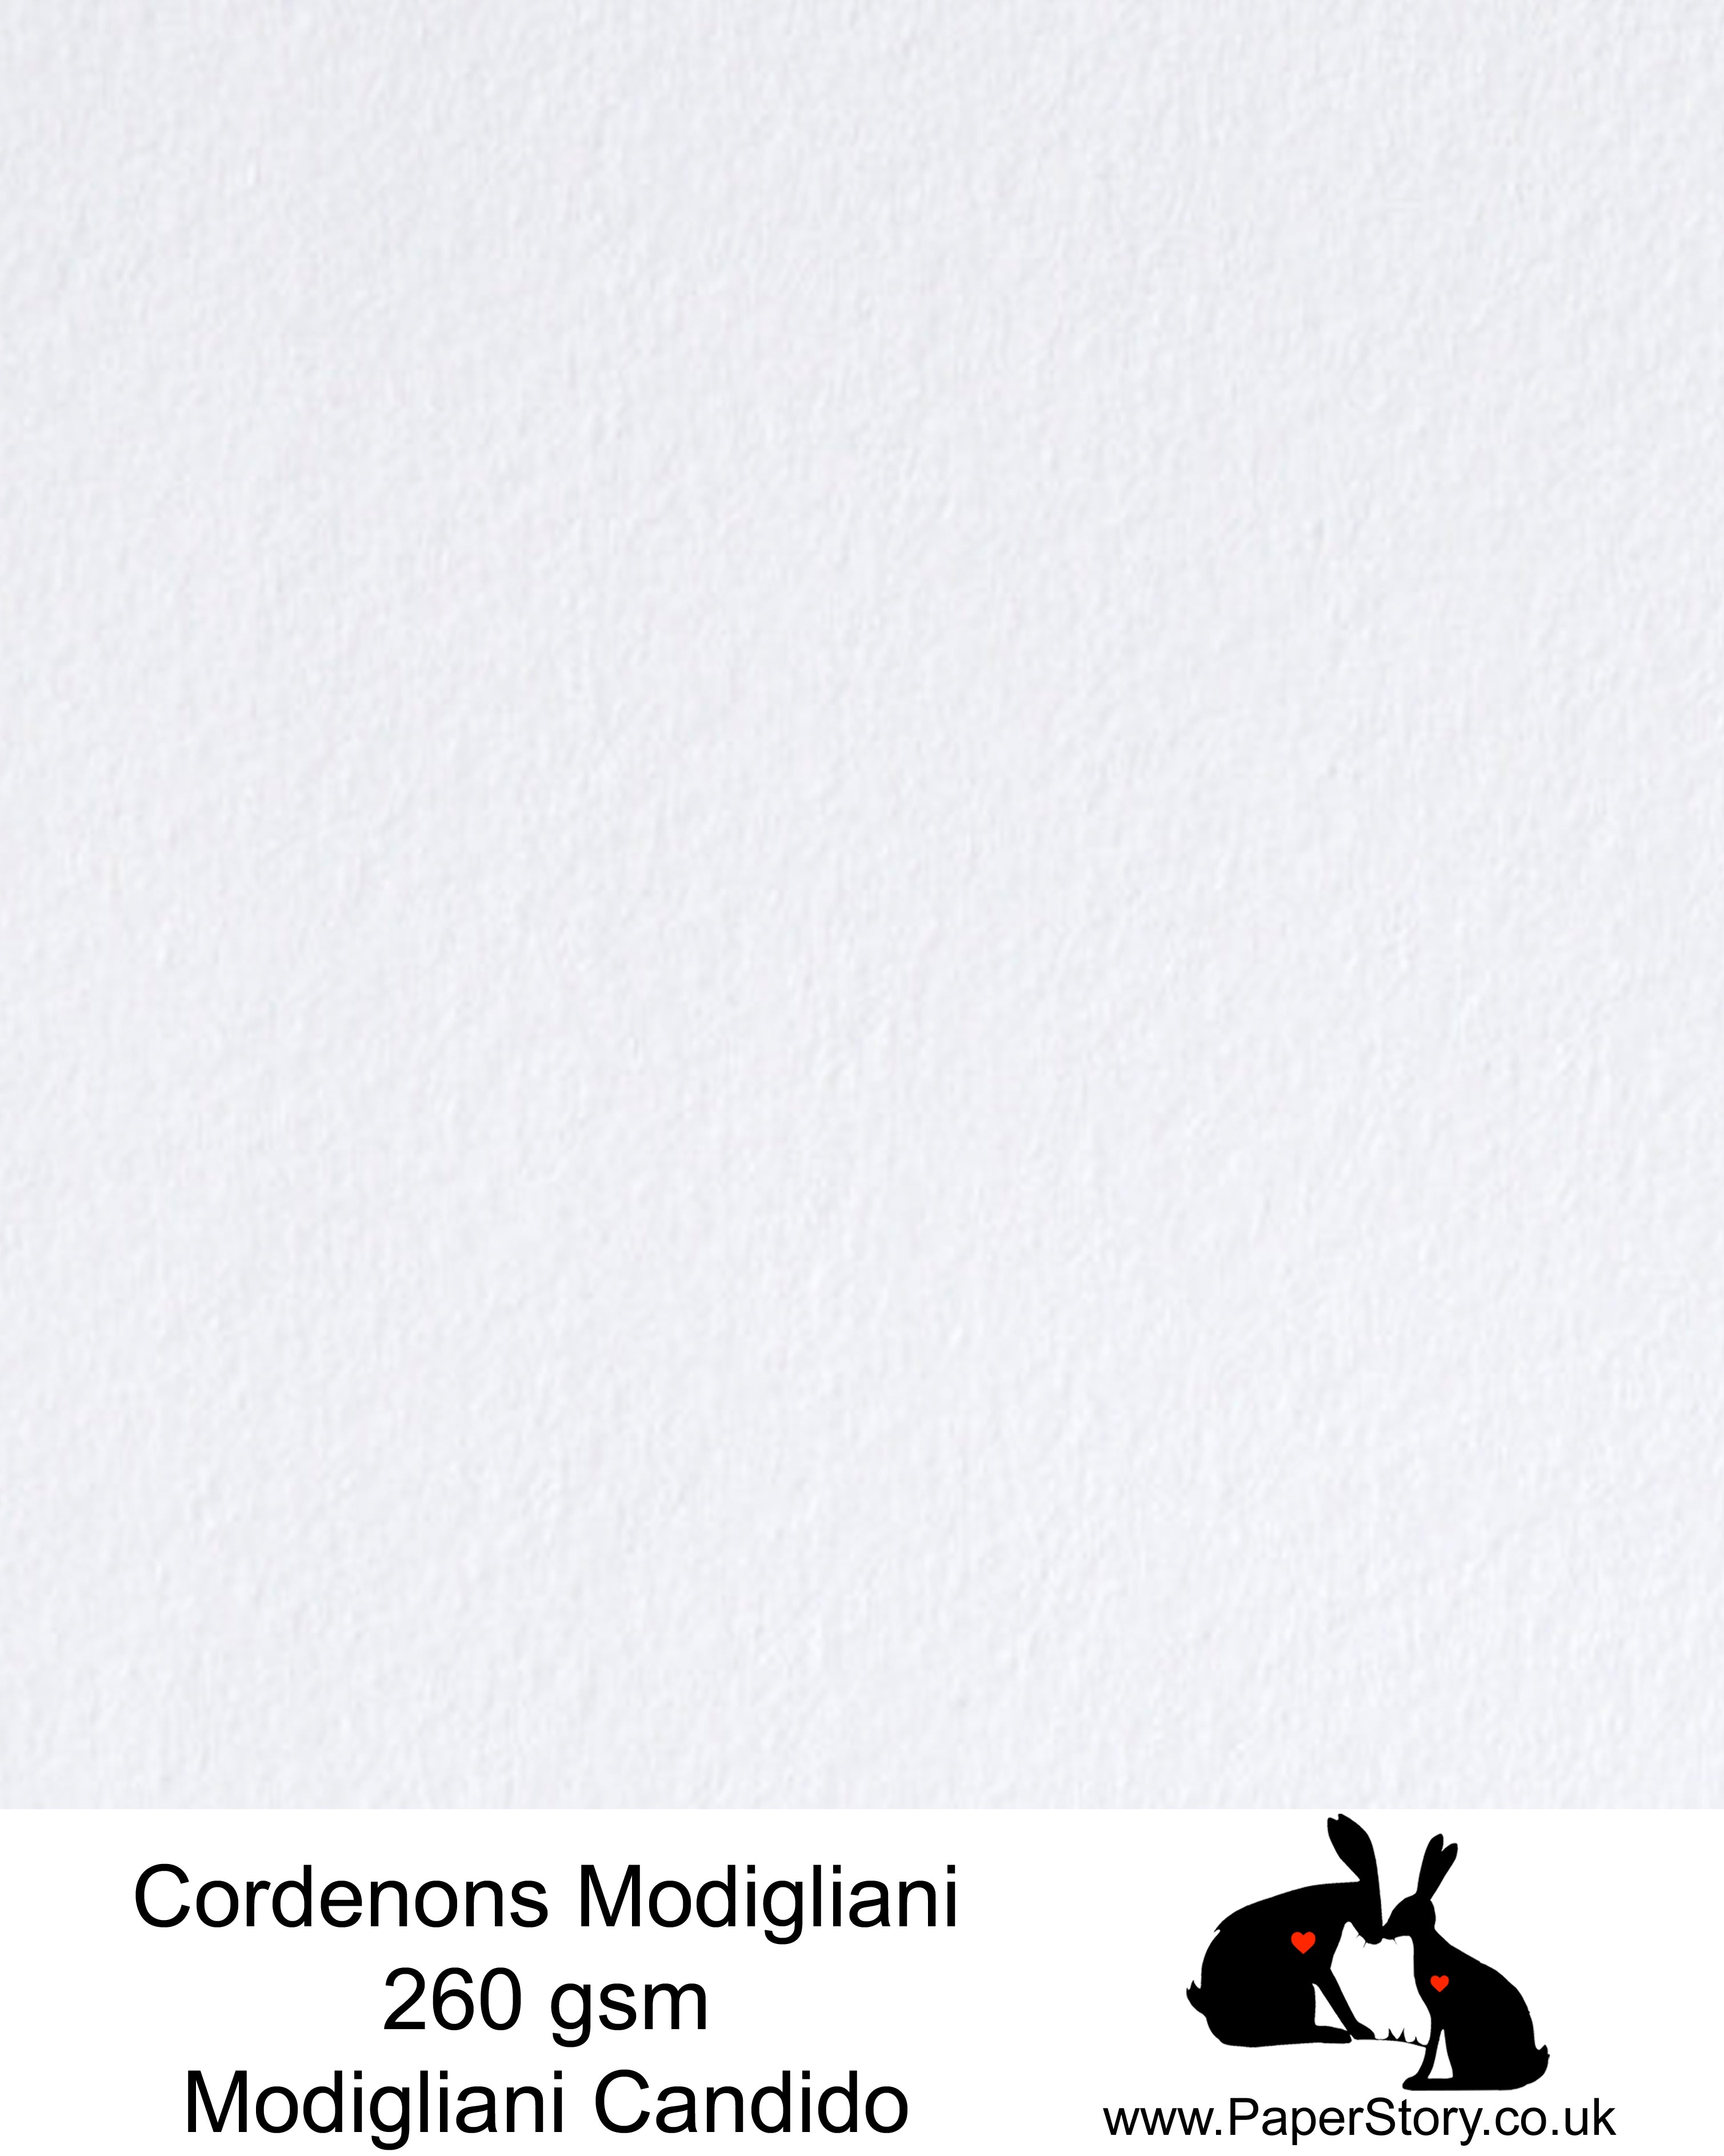 Mondigliani profession card for printing greetings cards, prints and stationery. This is a premium card with a watercolour textured effect finish 260 gsm A4. Made is Italy,  this beautiful card is the card we use for making PaperStory greetings cards. Can also be used for business cards, note cards and invitations. Professional card for card makers, prints easily at home on an inkjet printer.  